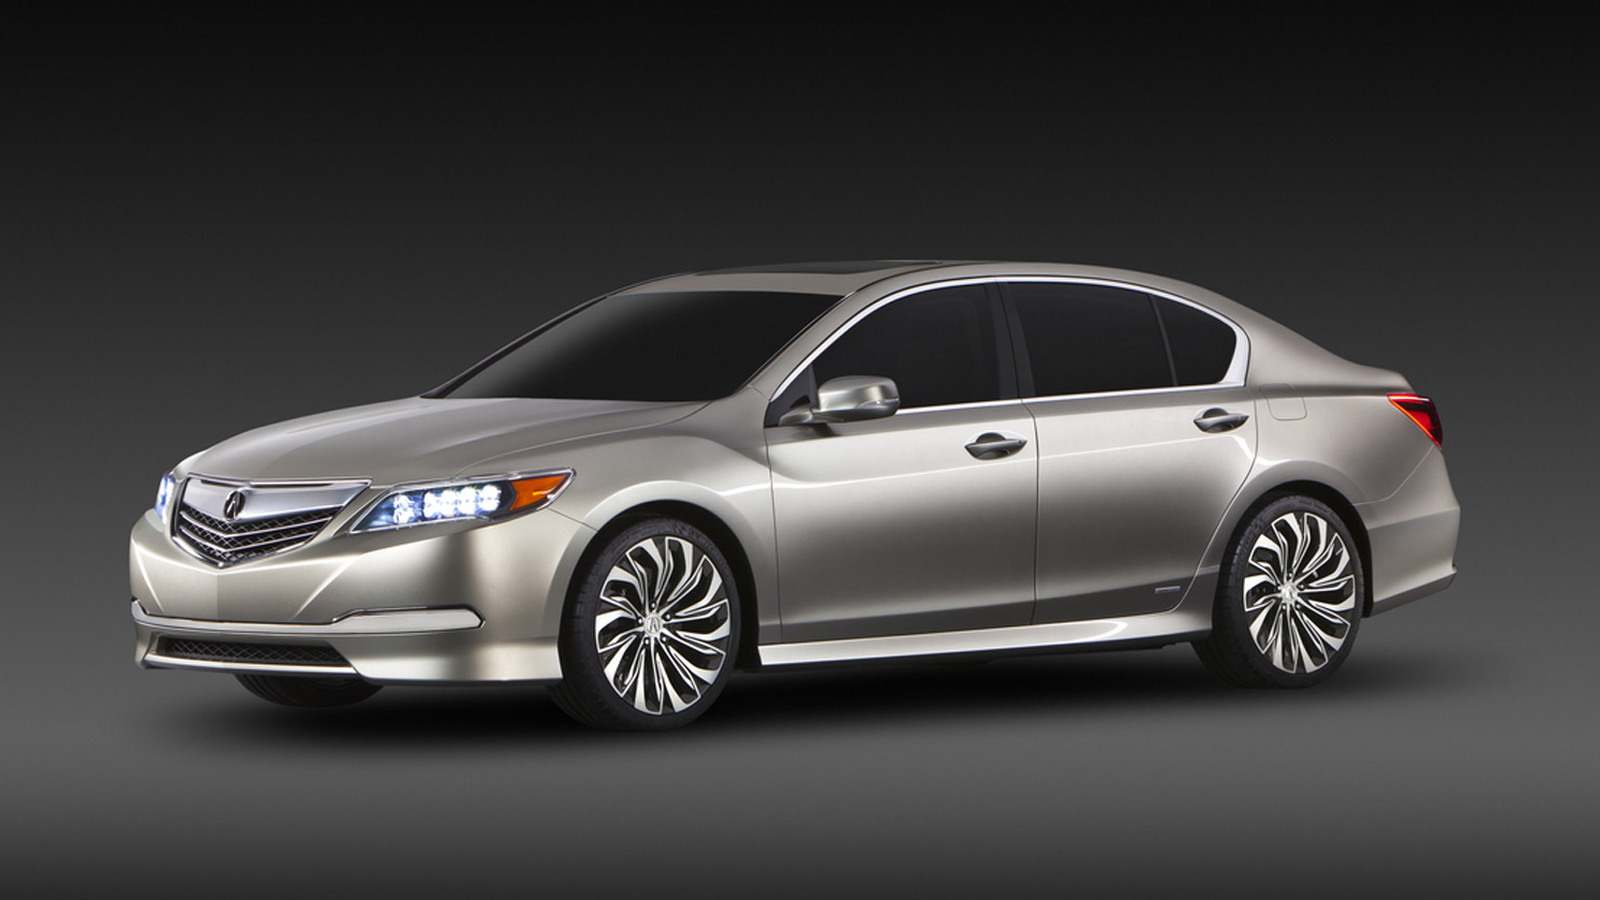 2014 Acura Rlx Previewed By Hybrid Concept In New York